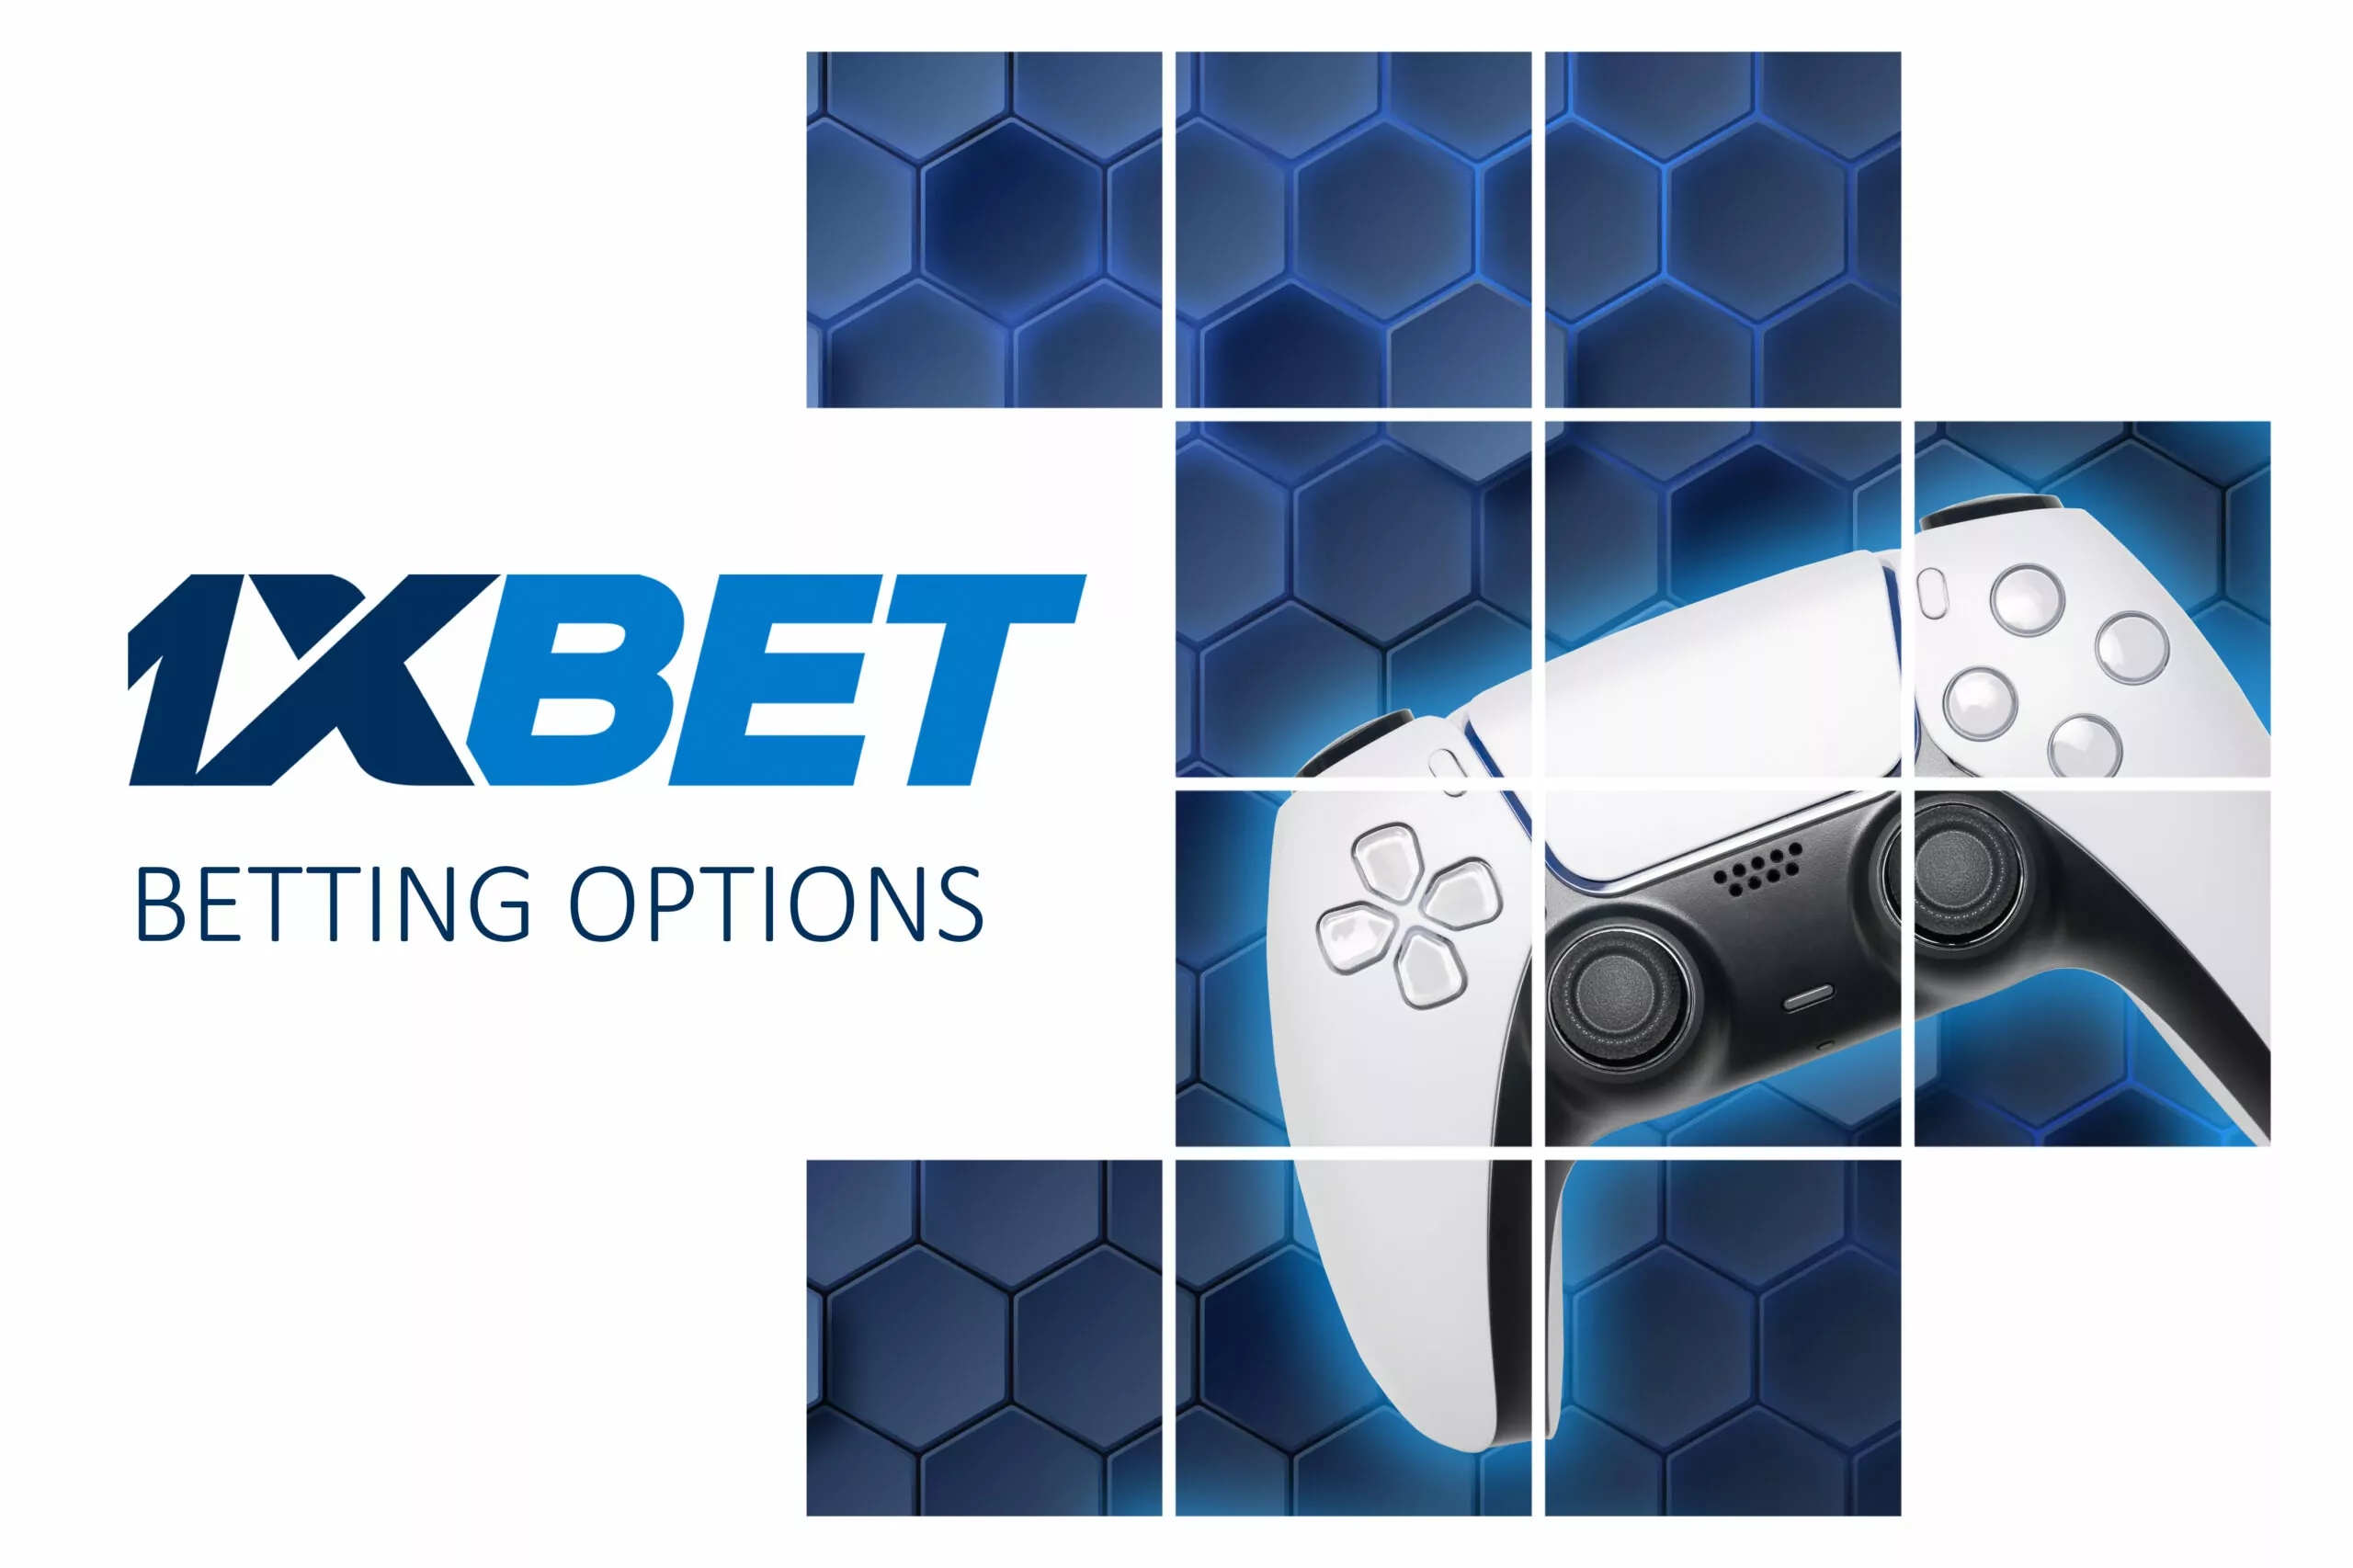 The 1xBet app supports both pre-match and live betting.